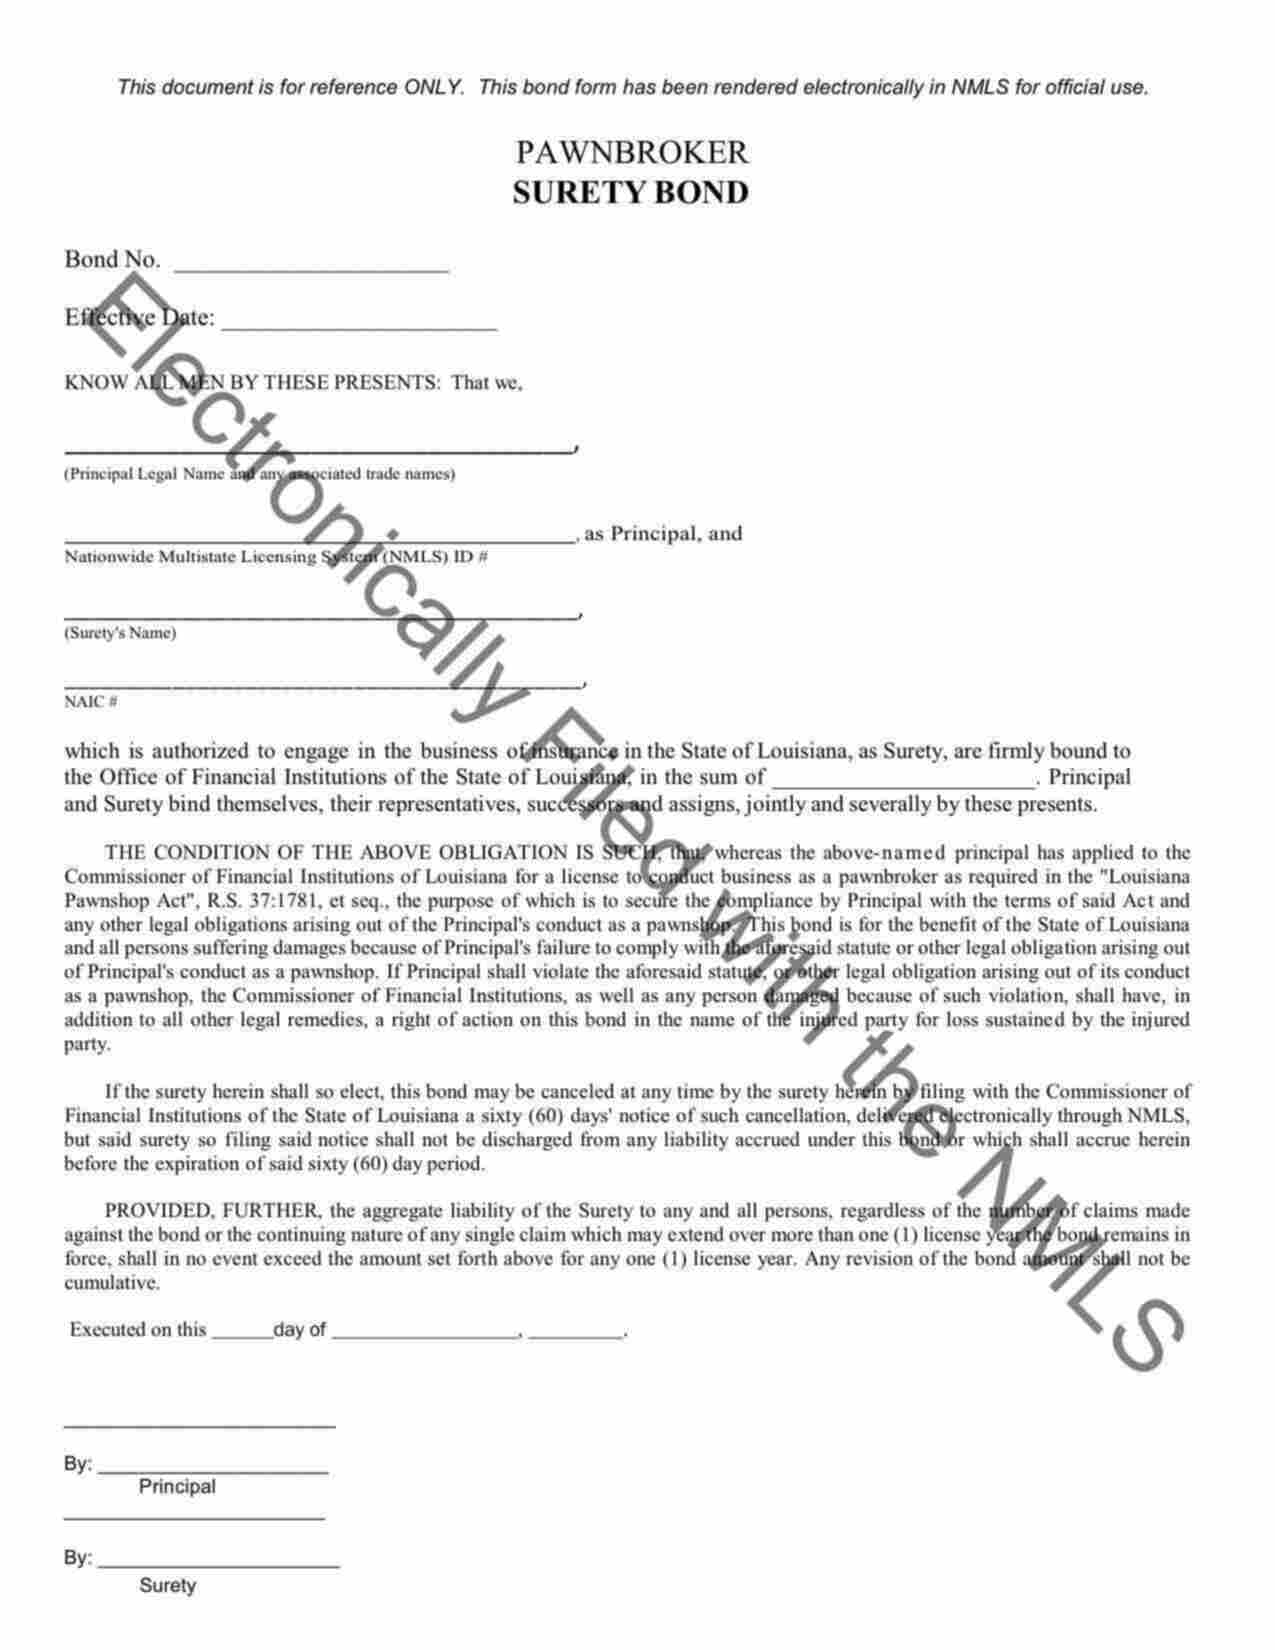 Louisiana Pawnbroker Main Office (out-of-state) Bond Form